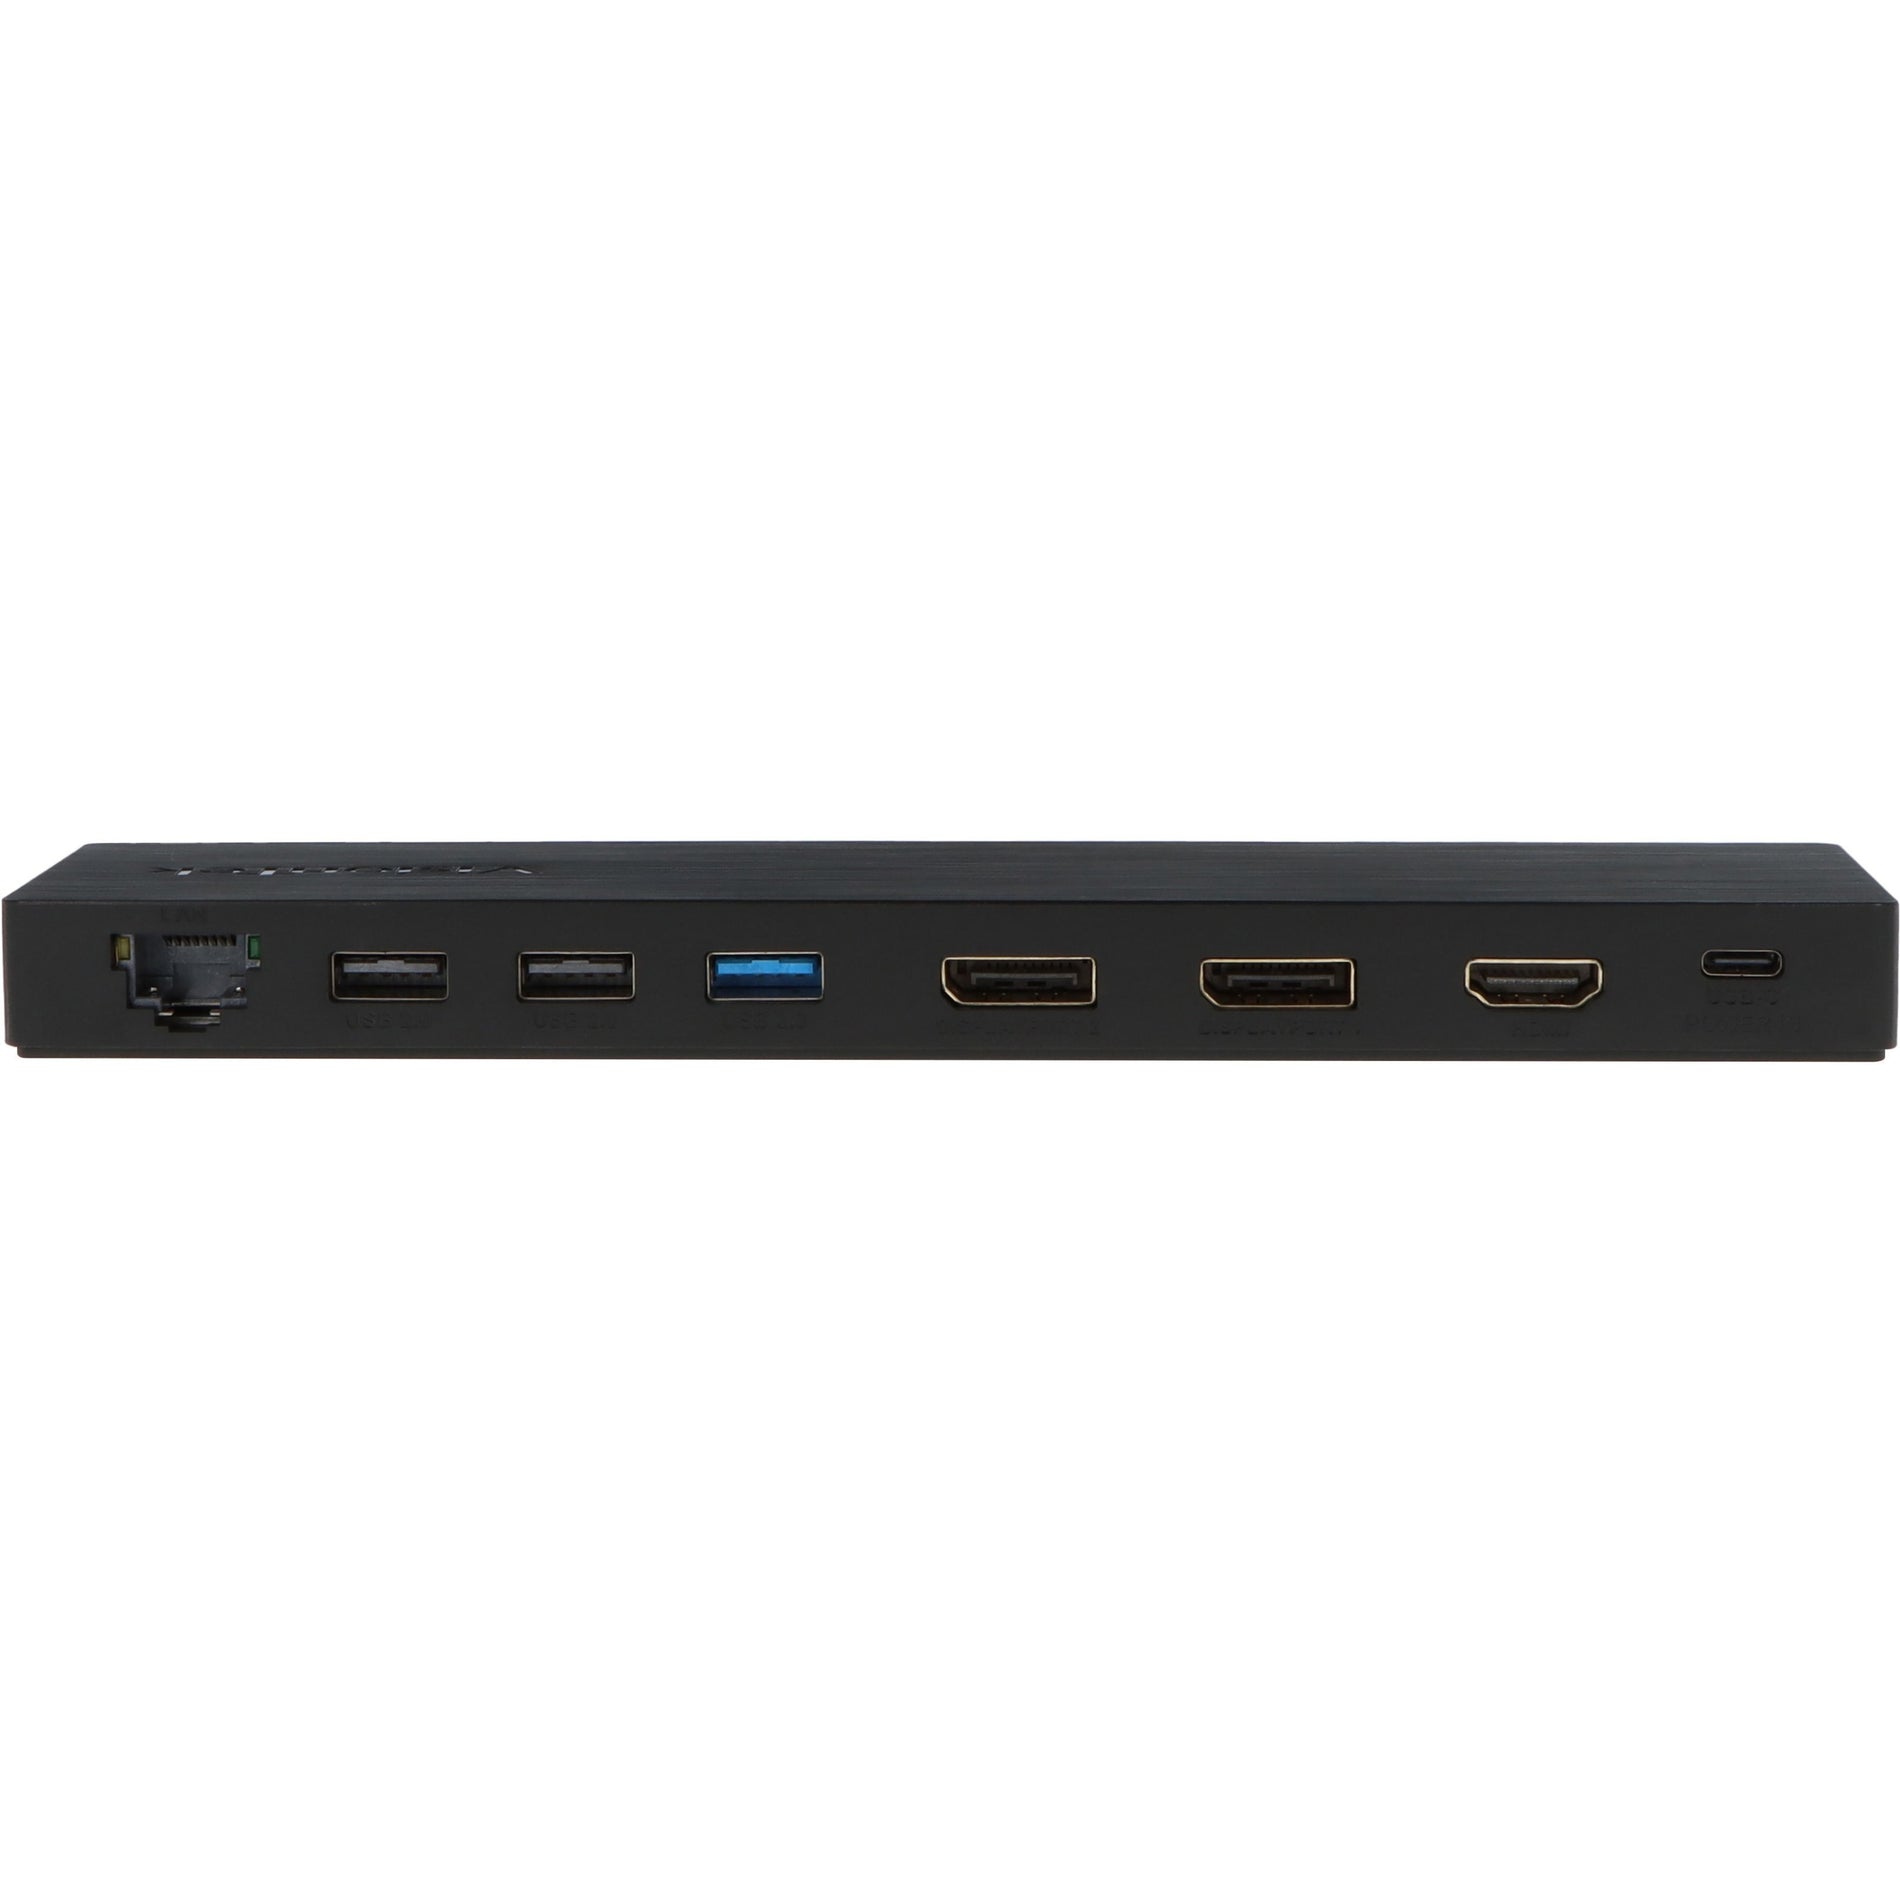 VisionTek 901381 VT2500 Triple Display USB-C Docking Station with Power Delivery, Compatible with Windows, Mac, and Chrome Laptops